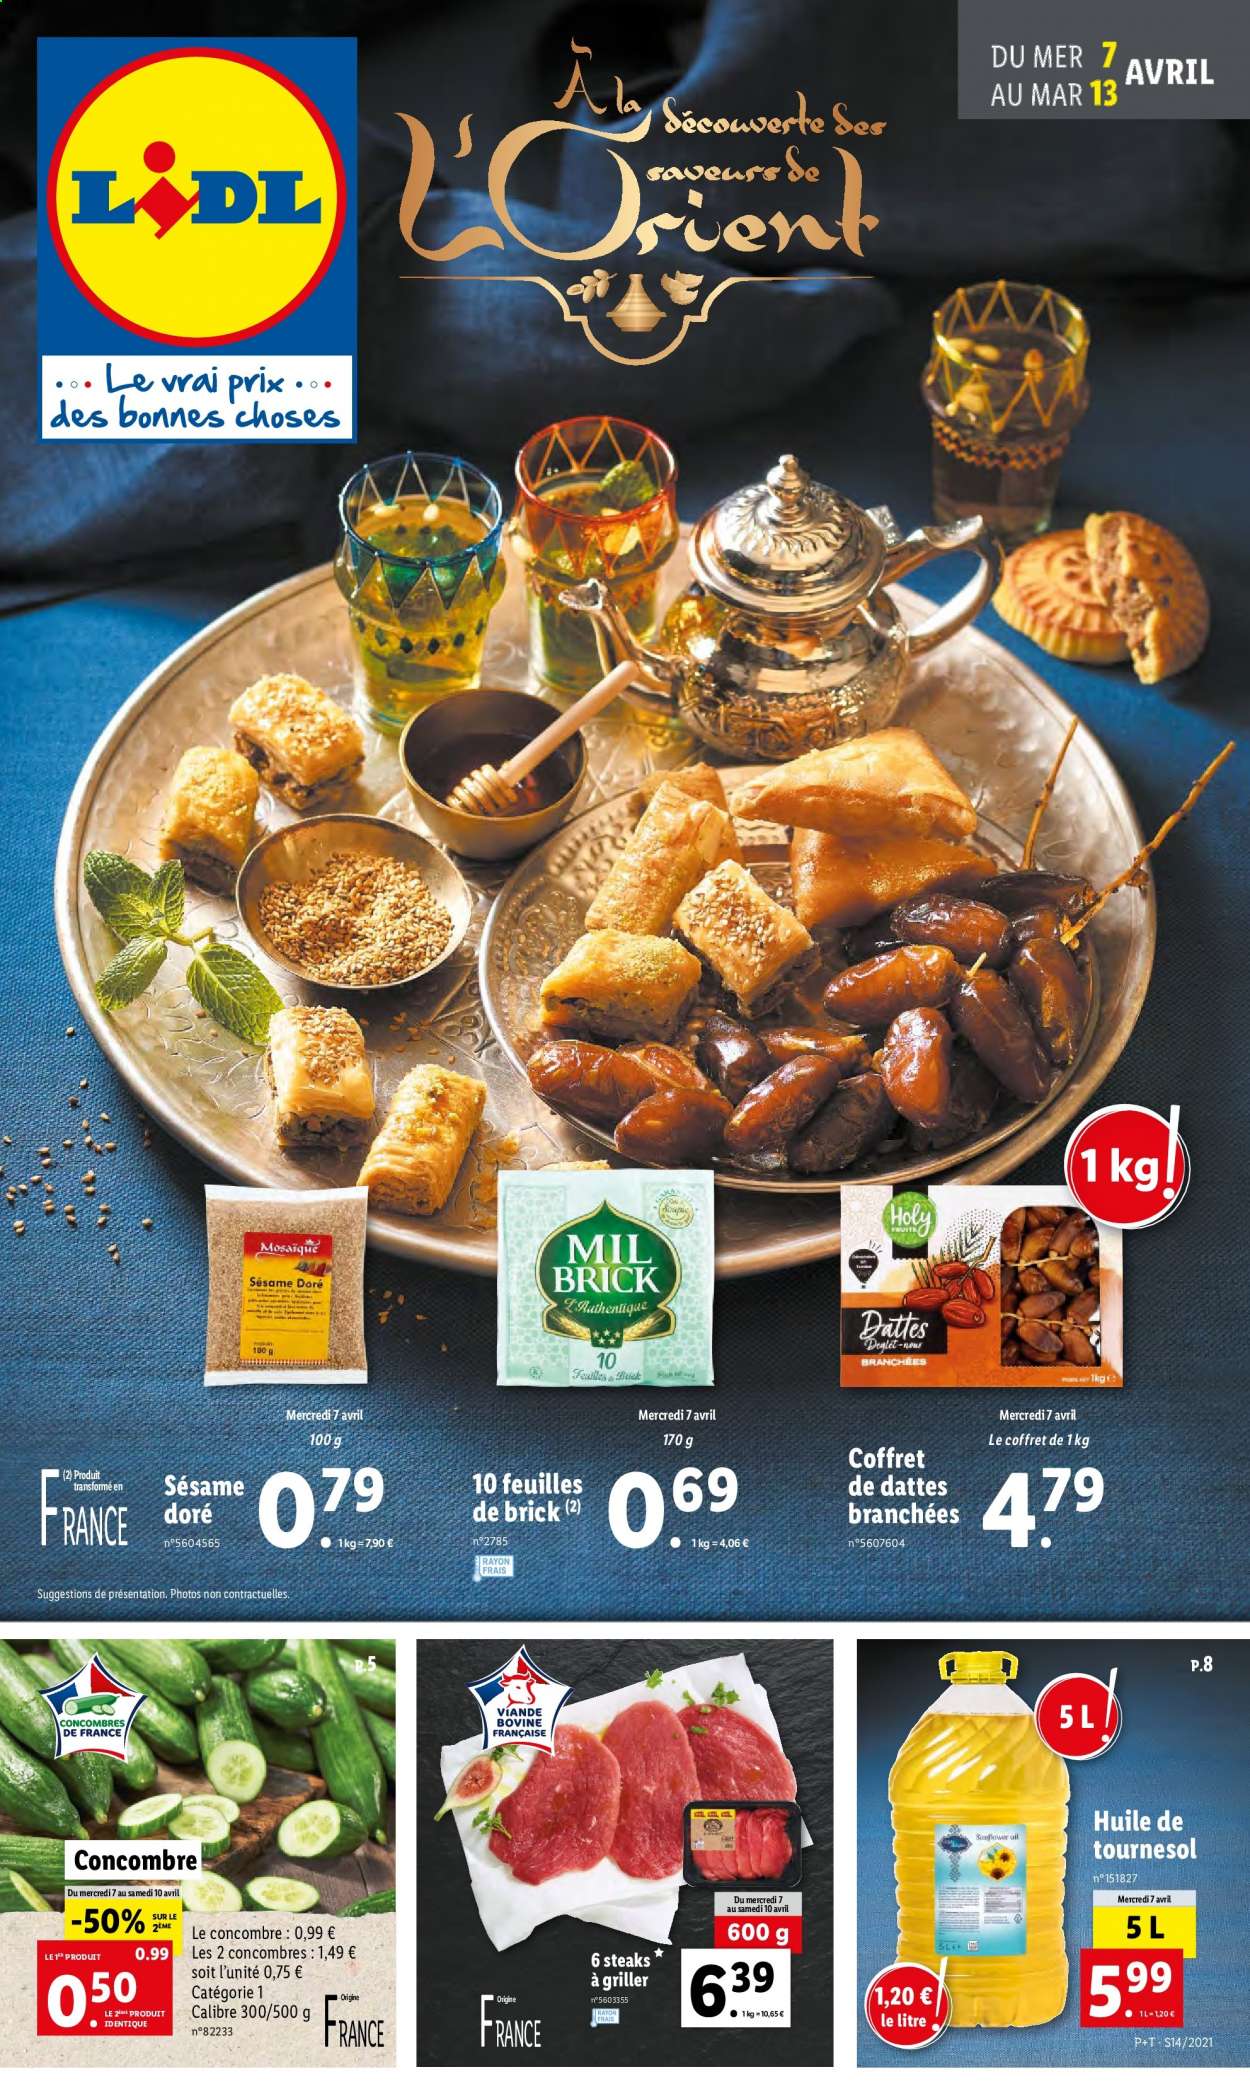 Catalogue Lidl - 07.04.2021 - 13.04.2021. Page 1.